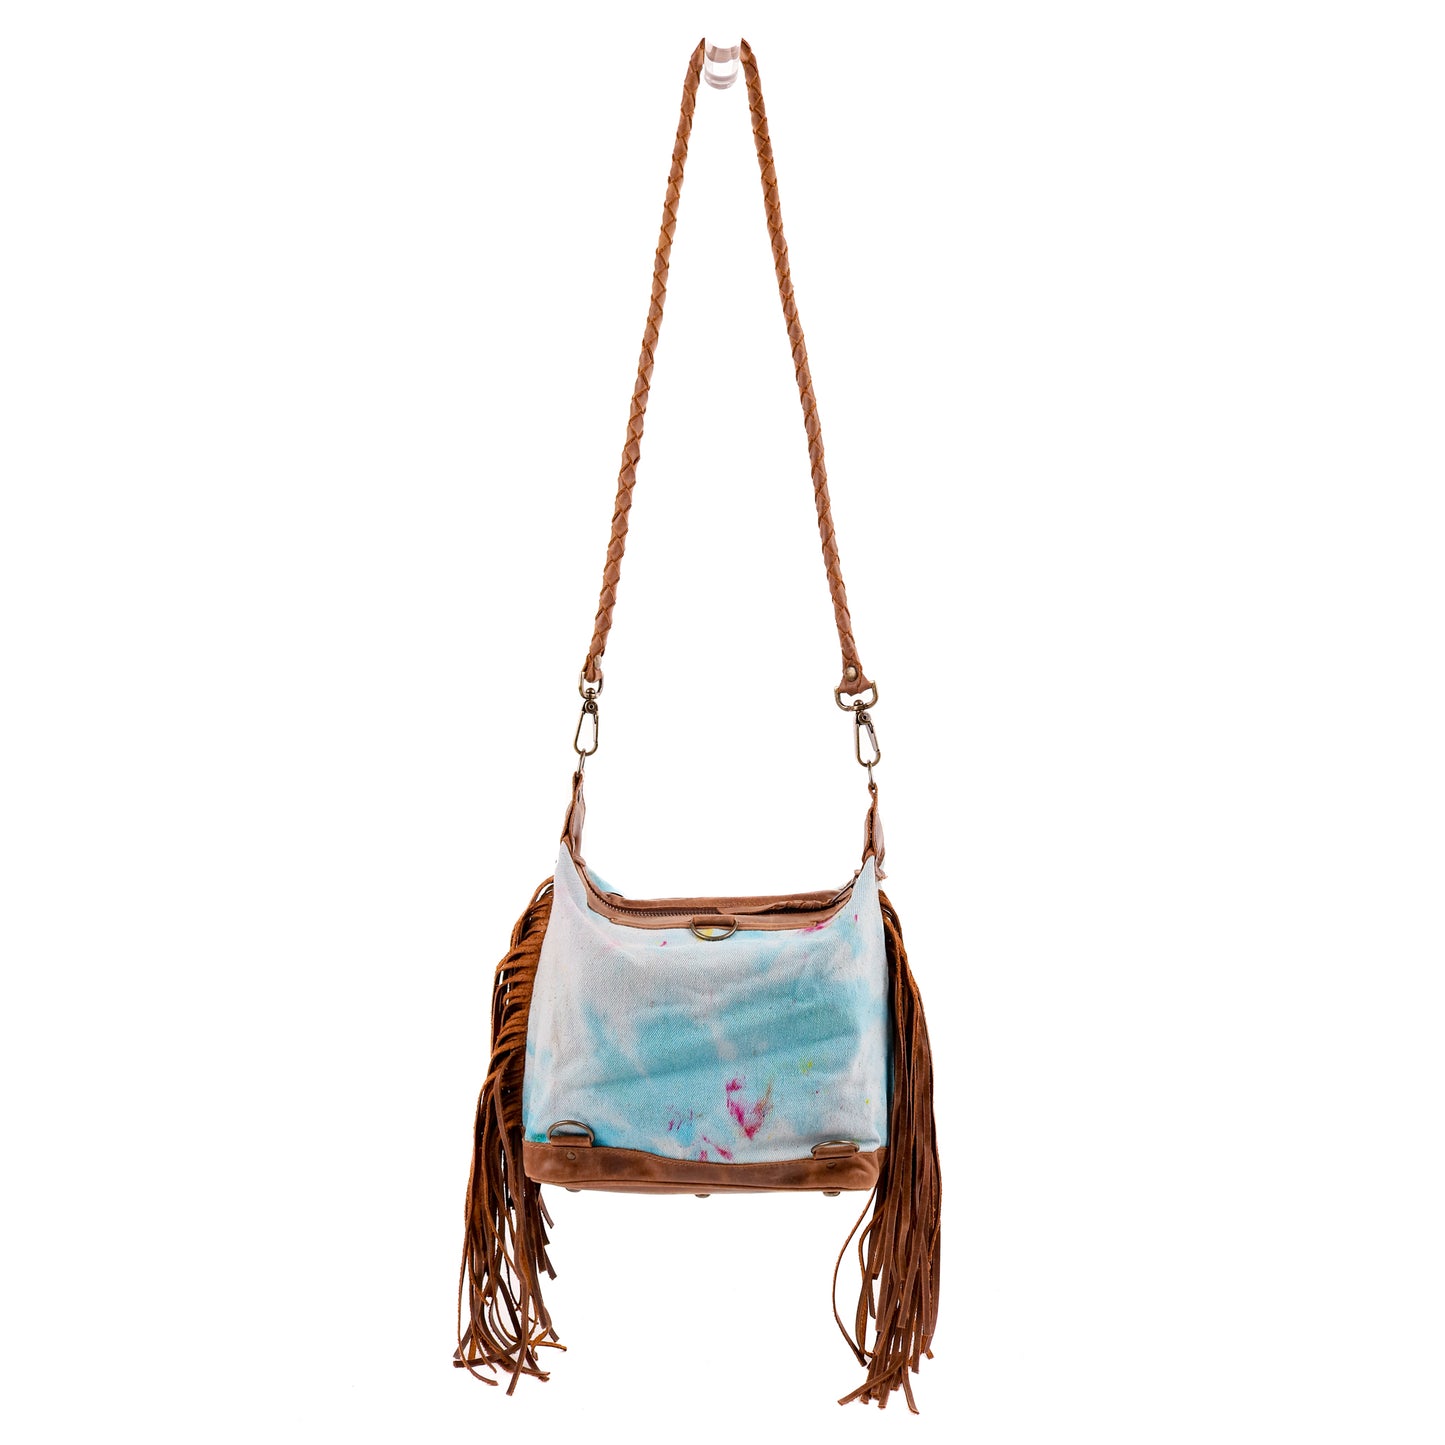 BEATRIZ MINI CONVERTIBLE DAY BAG WITH FRINGE - UPCYCLED DENIM - TIE DYE - CAOBA - NO. 10015